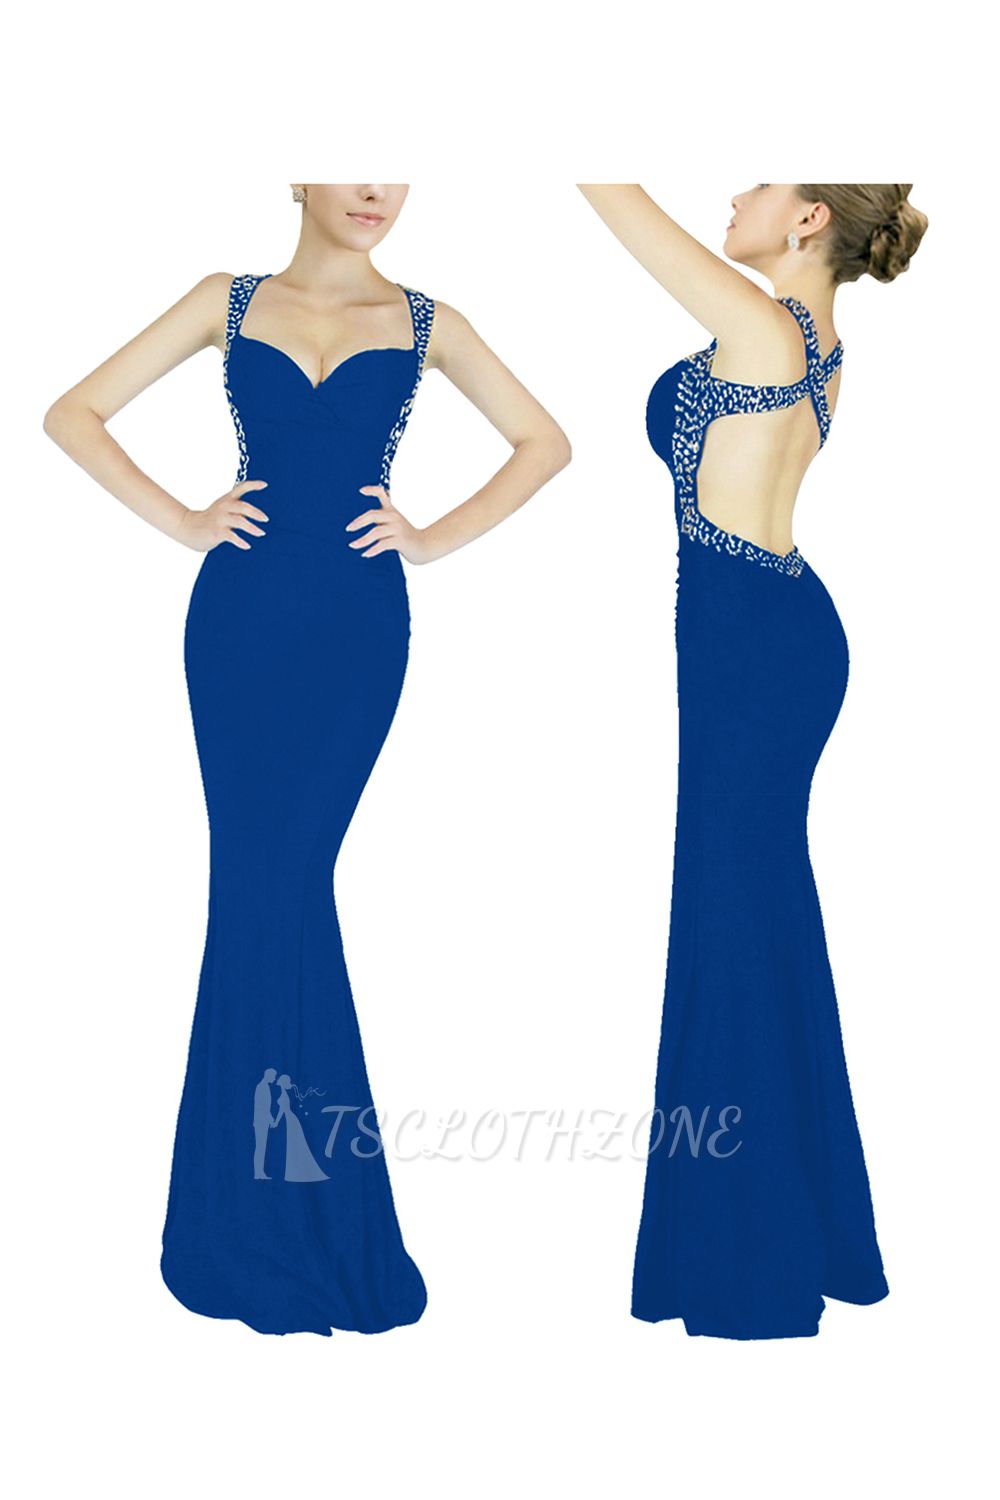 Ceci | Criss-cross Back Mermaid Prom Dress with Beaded Straps